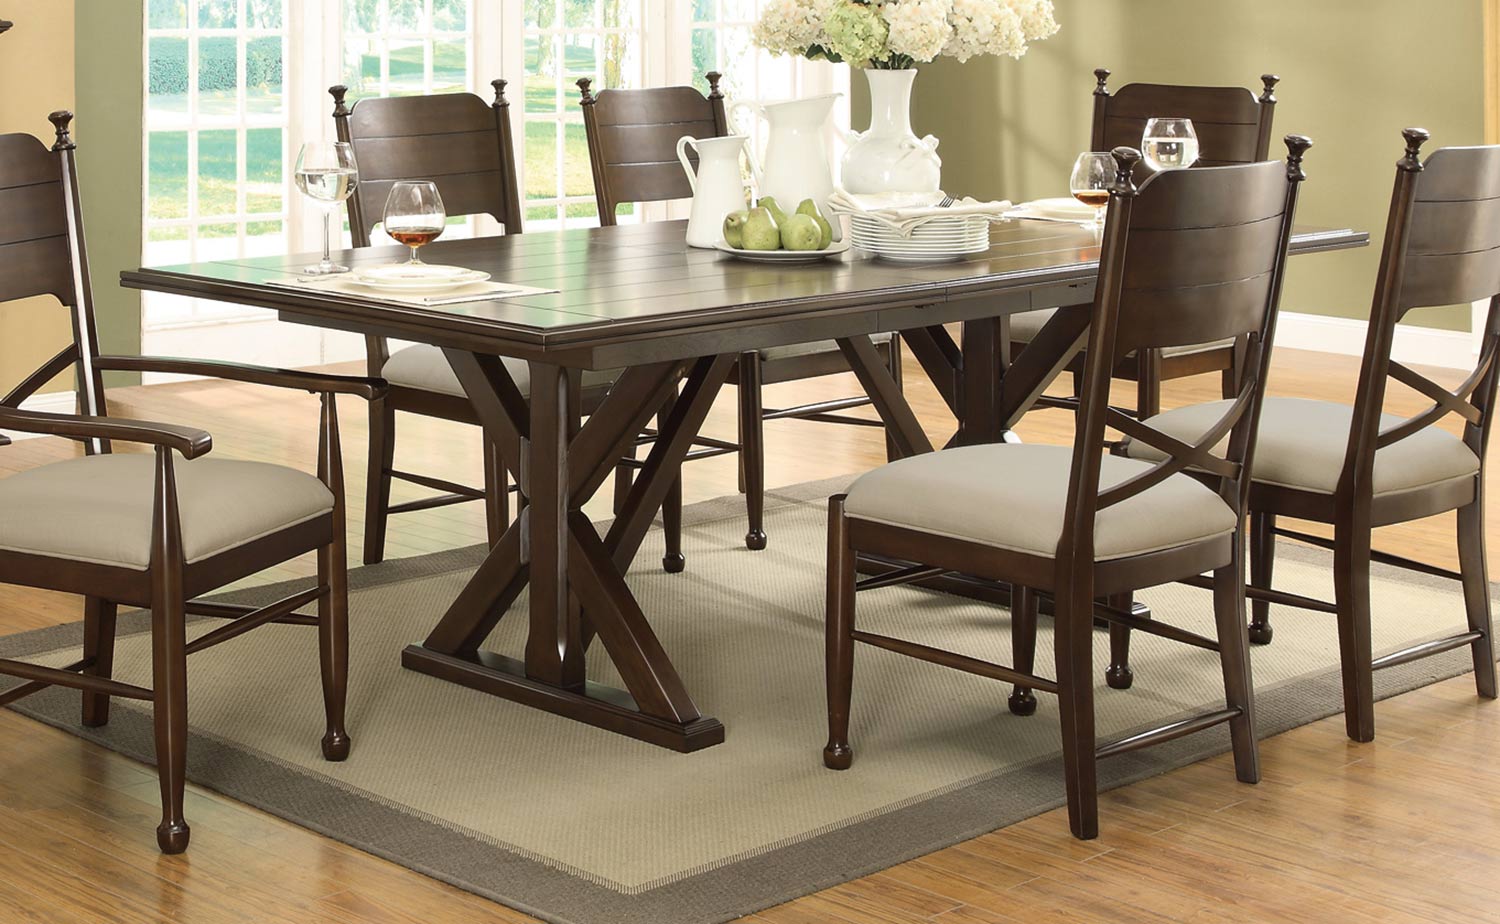 Coaster Camilla Dining Table - Brown Cherry